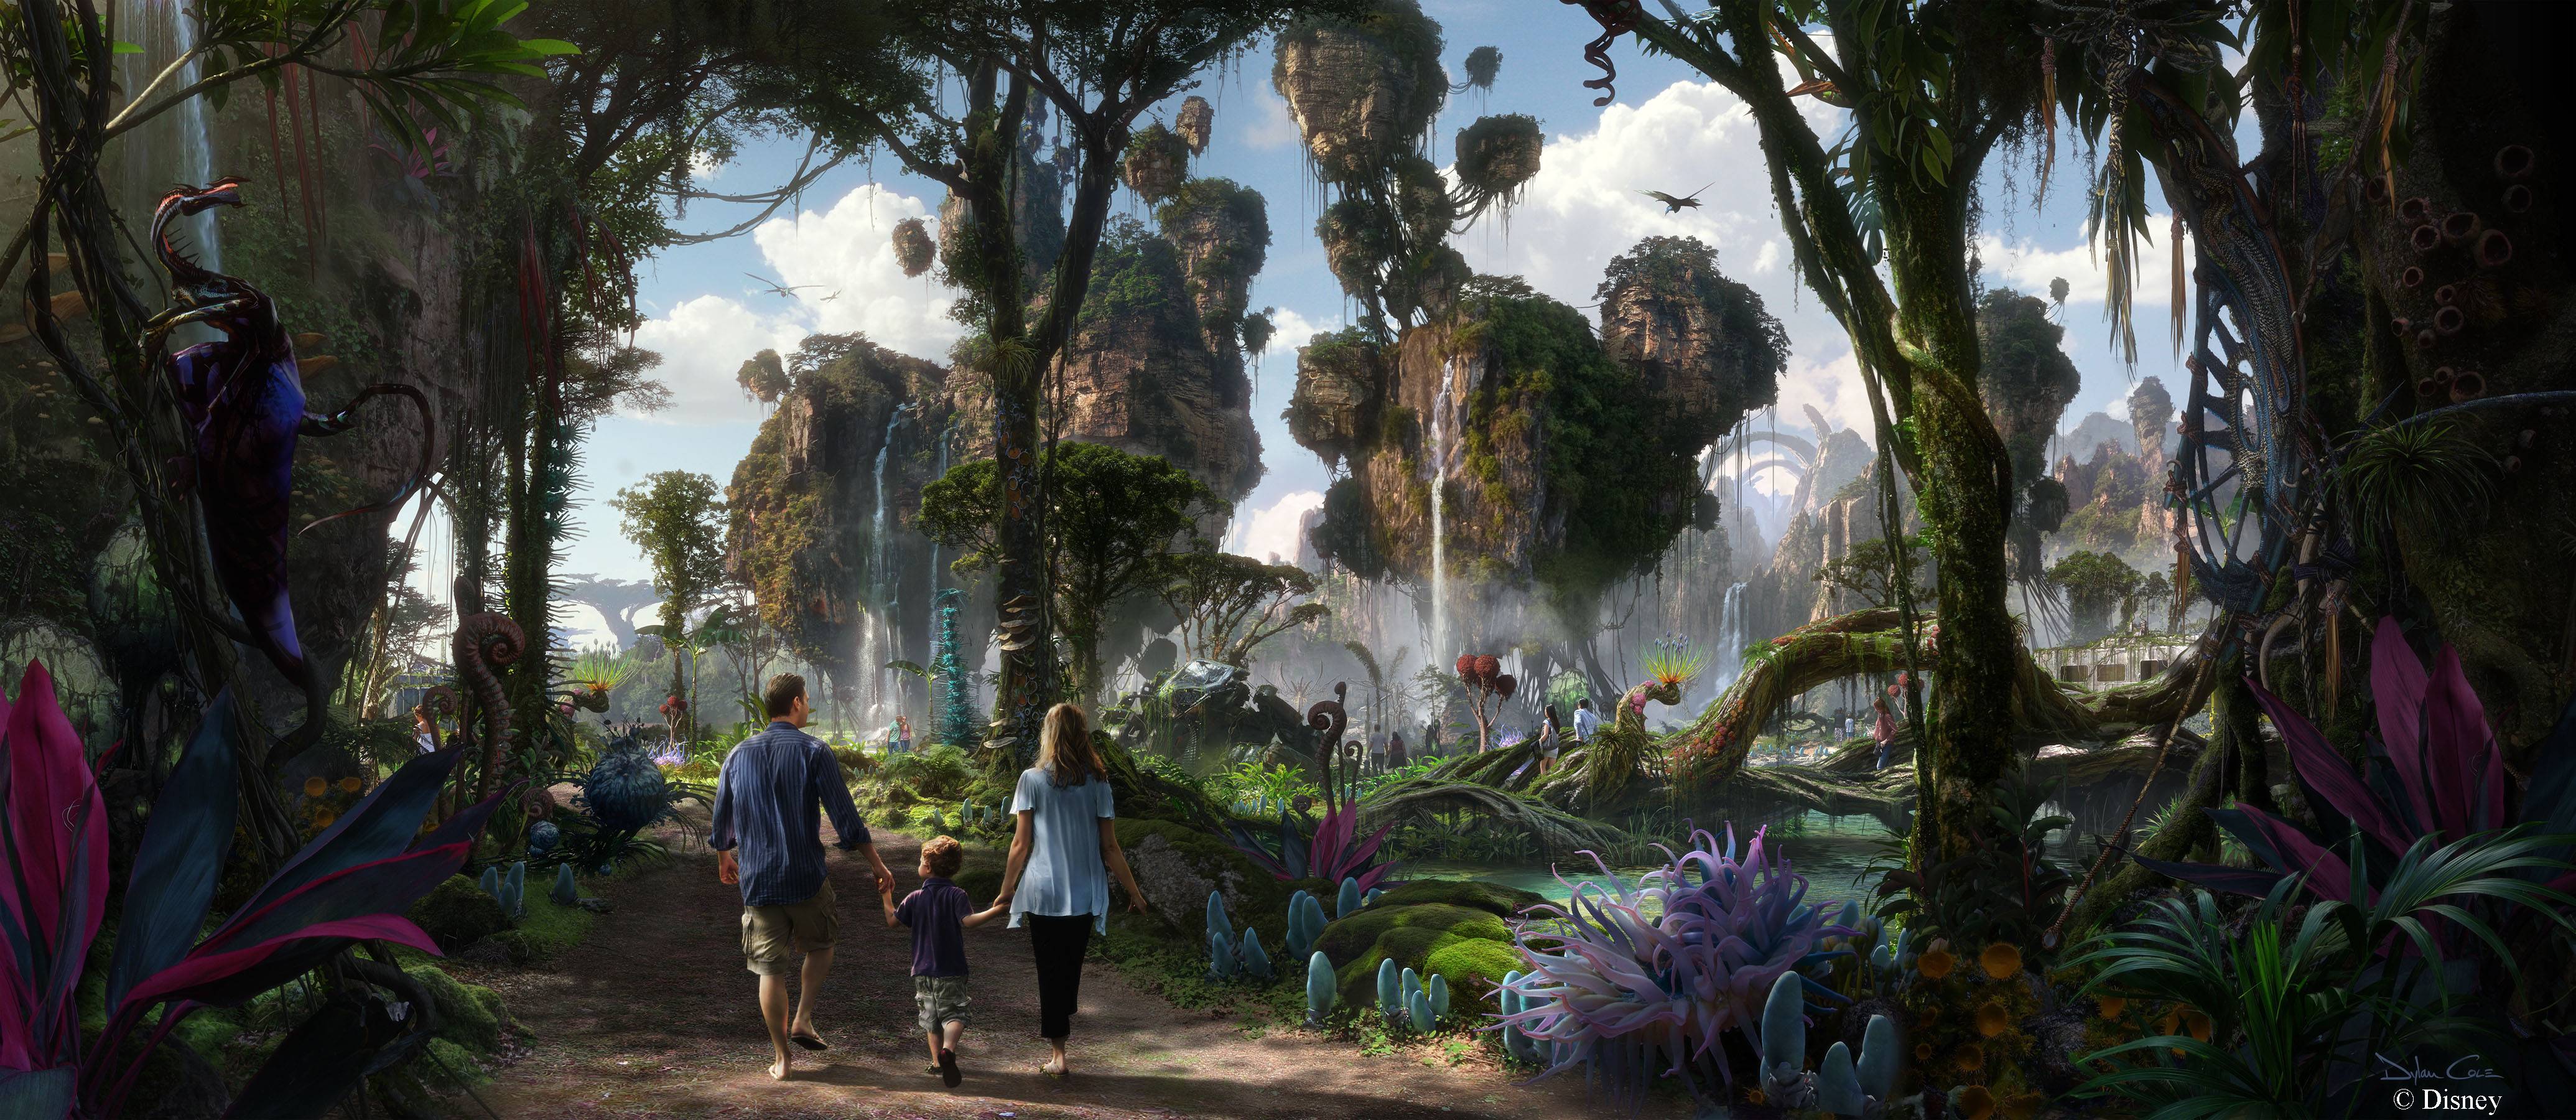 PHOTOS - Disney releases new AVATAR land details with impressive new concept art